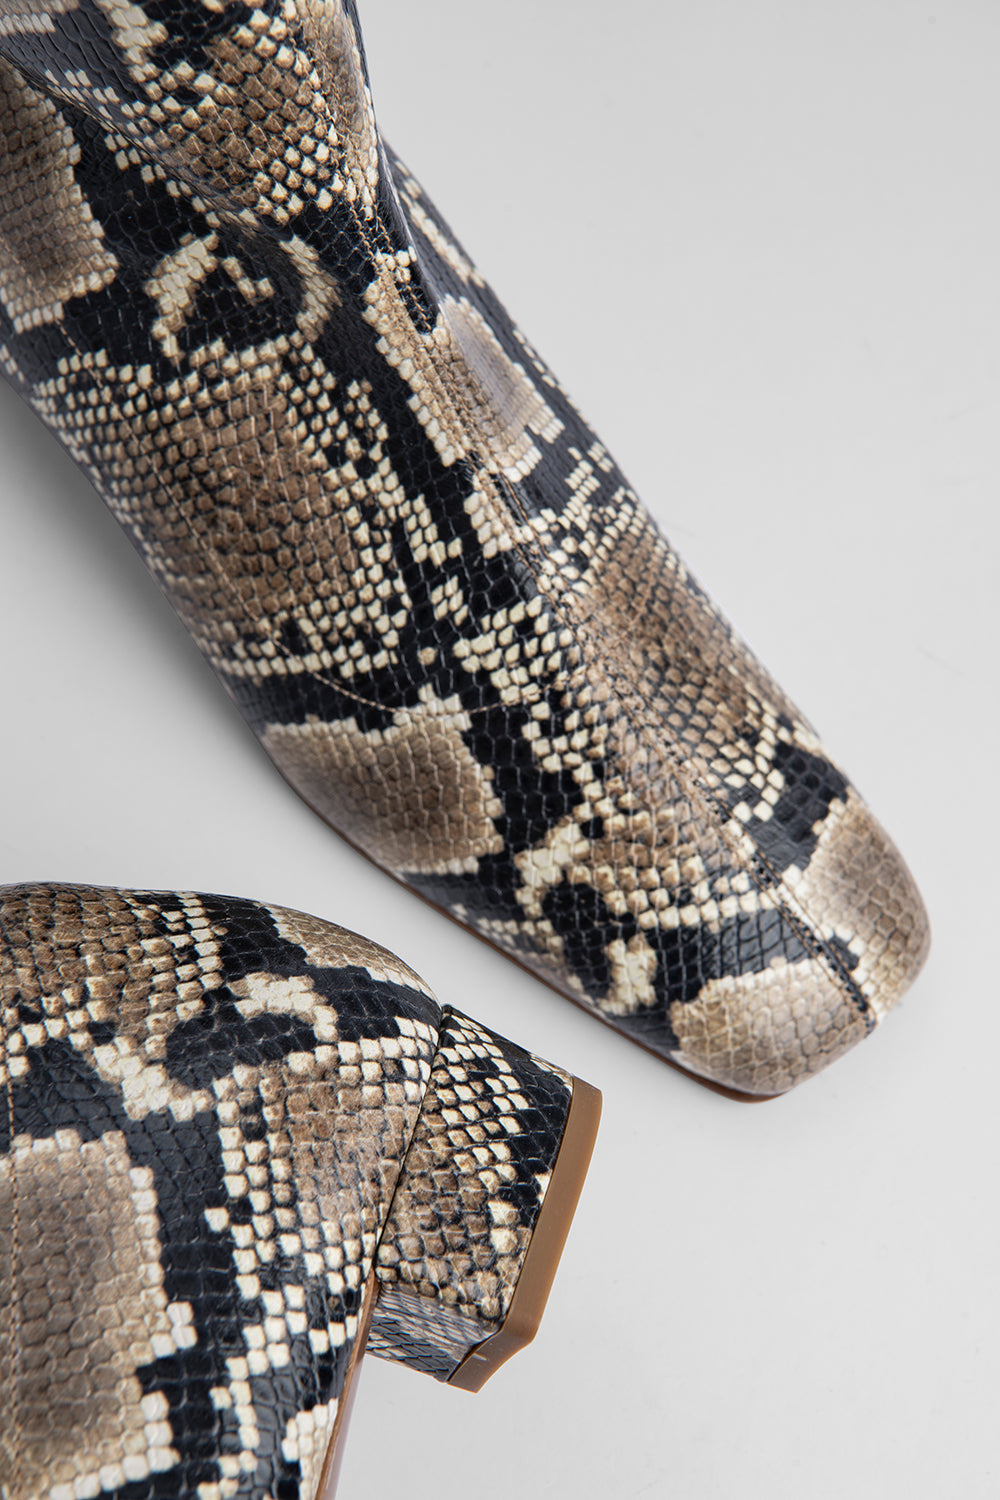 boa constrictor boots